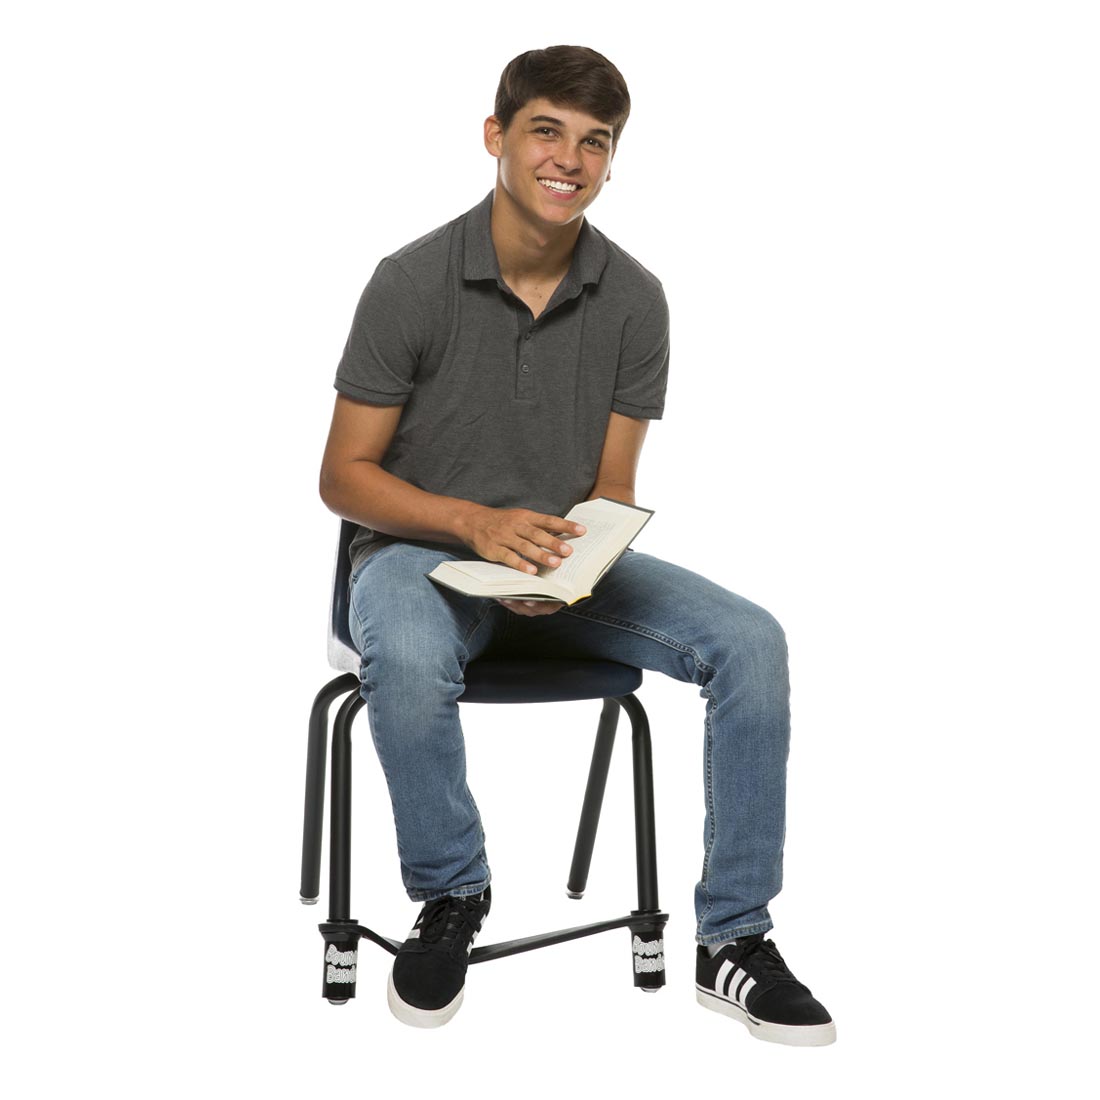 Person on a Chair using a Bouncyband